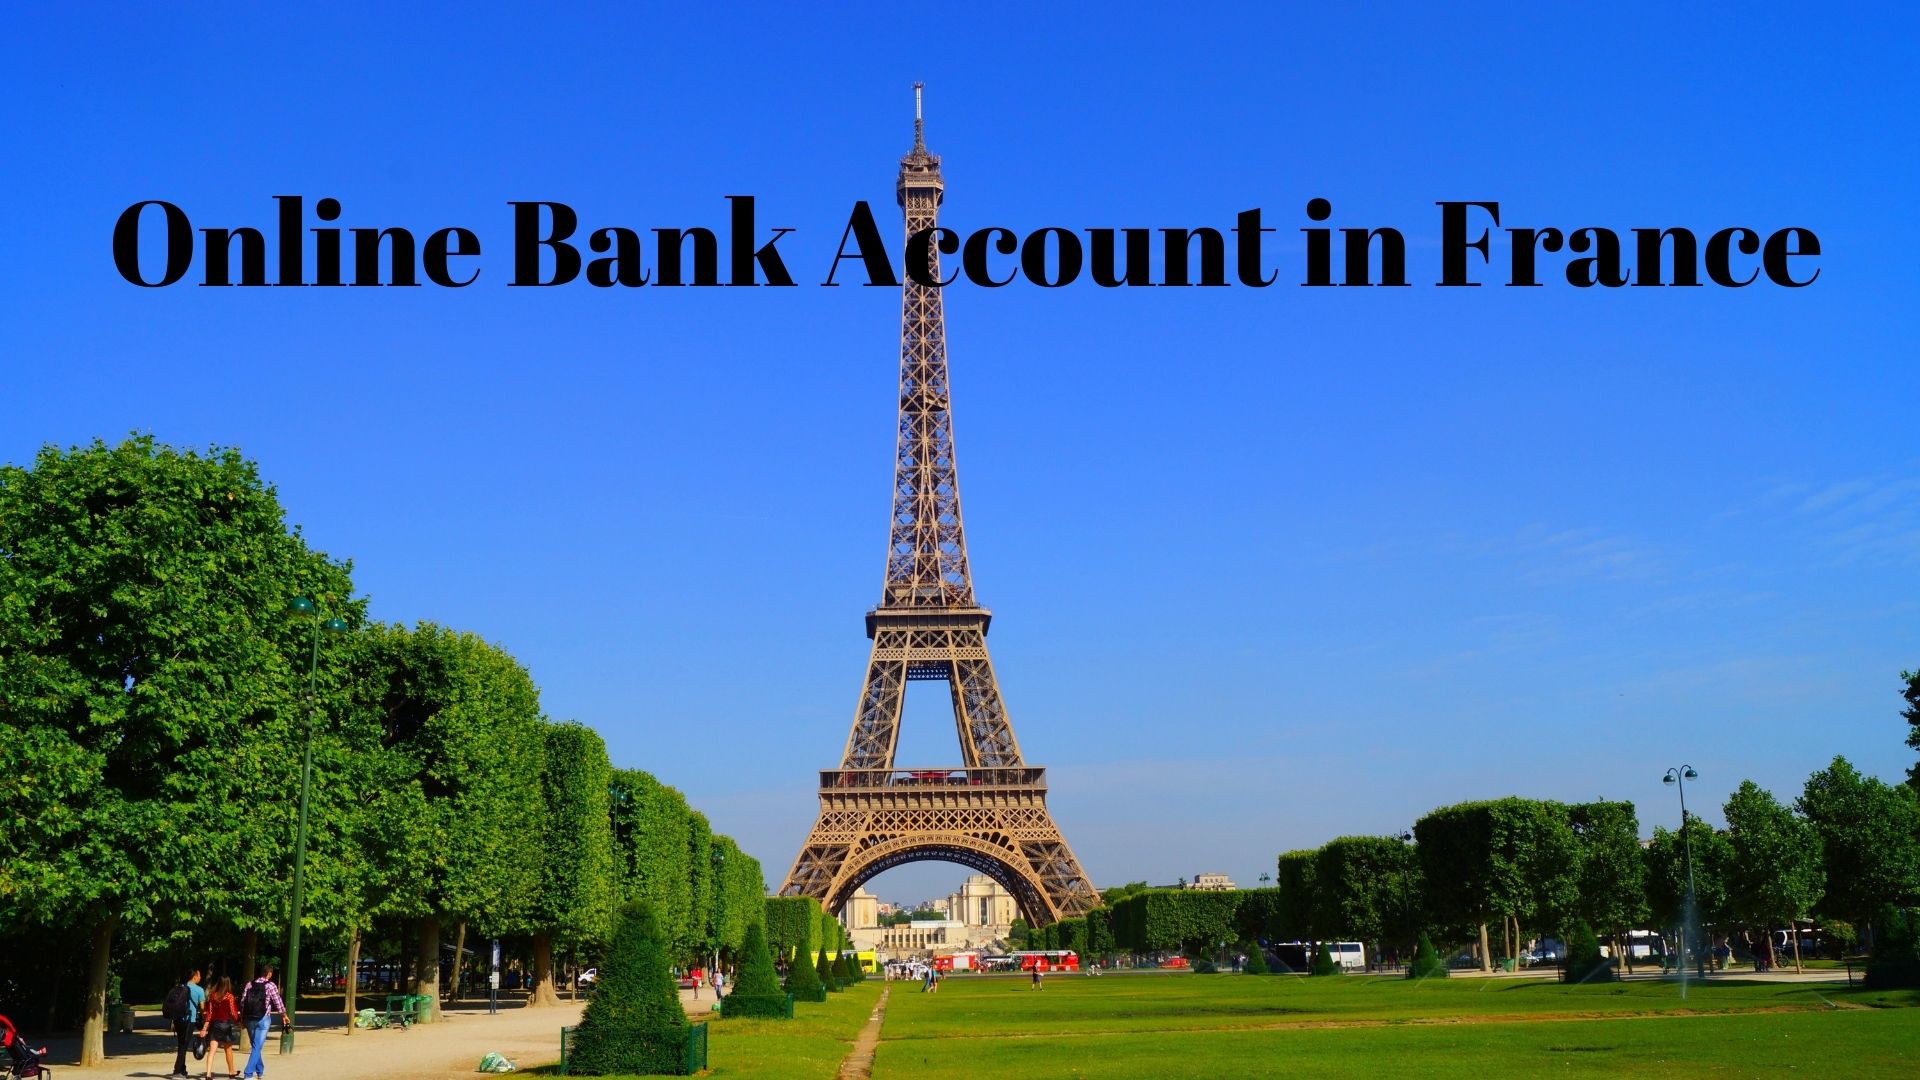 Open An Online Bank Account in France